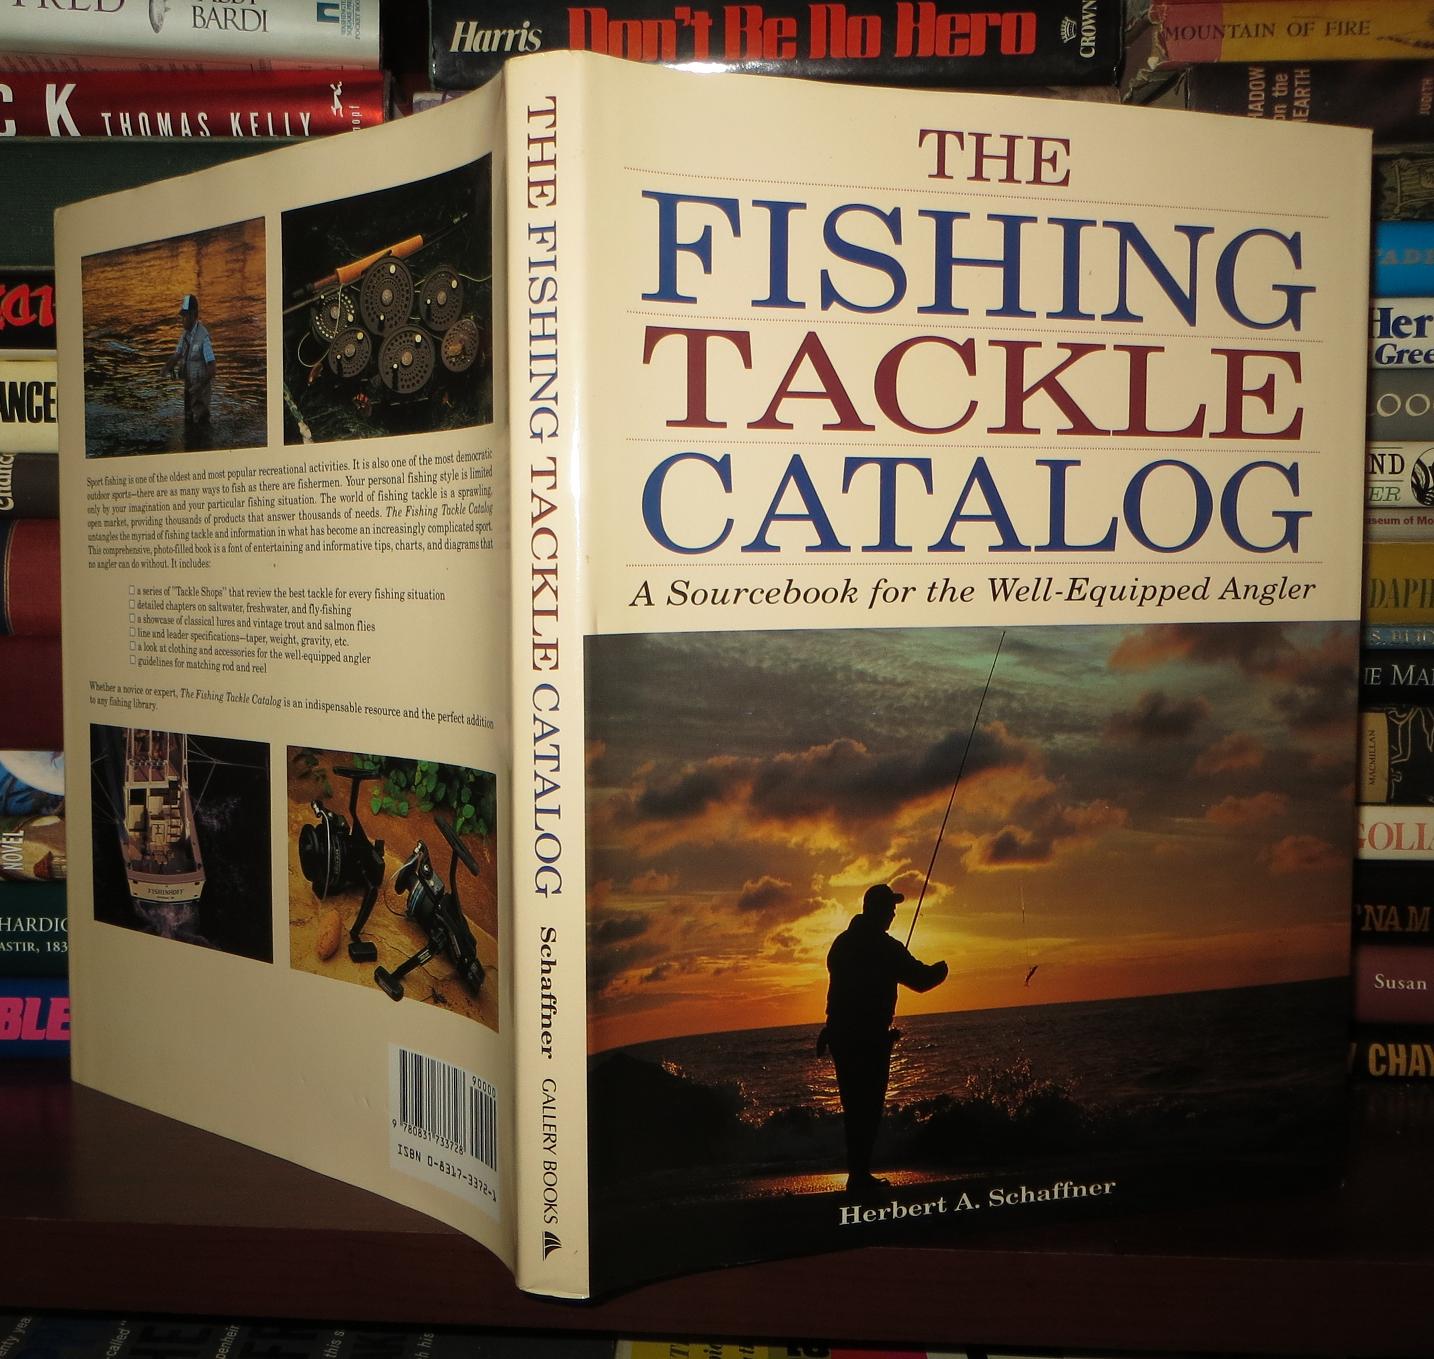 The Fishing Tackle Catalog: A Sourcebook for the Well-equipped Angler [Book]